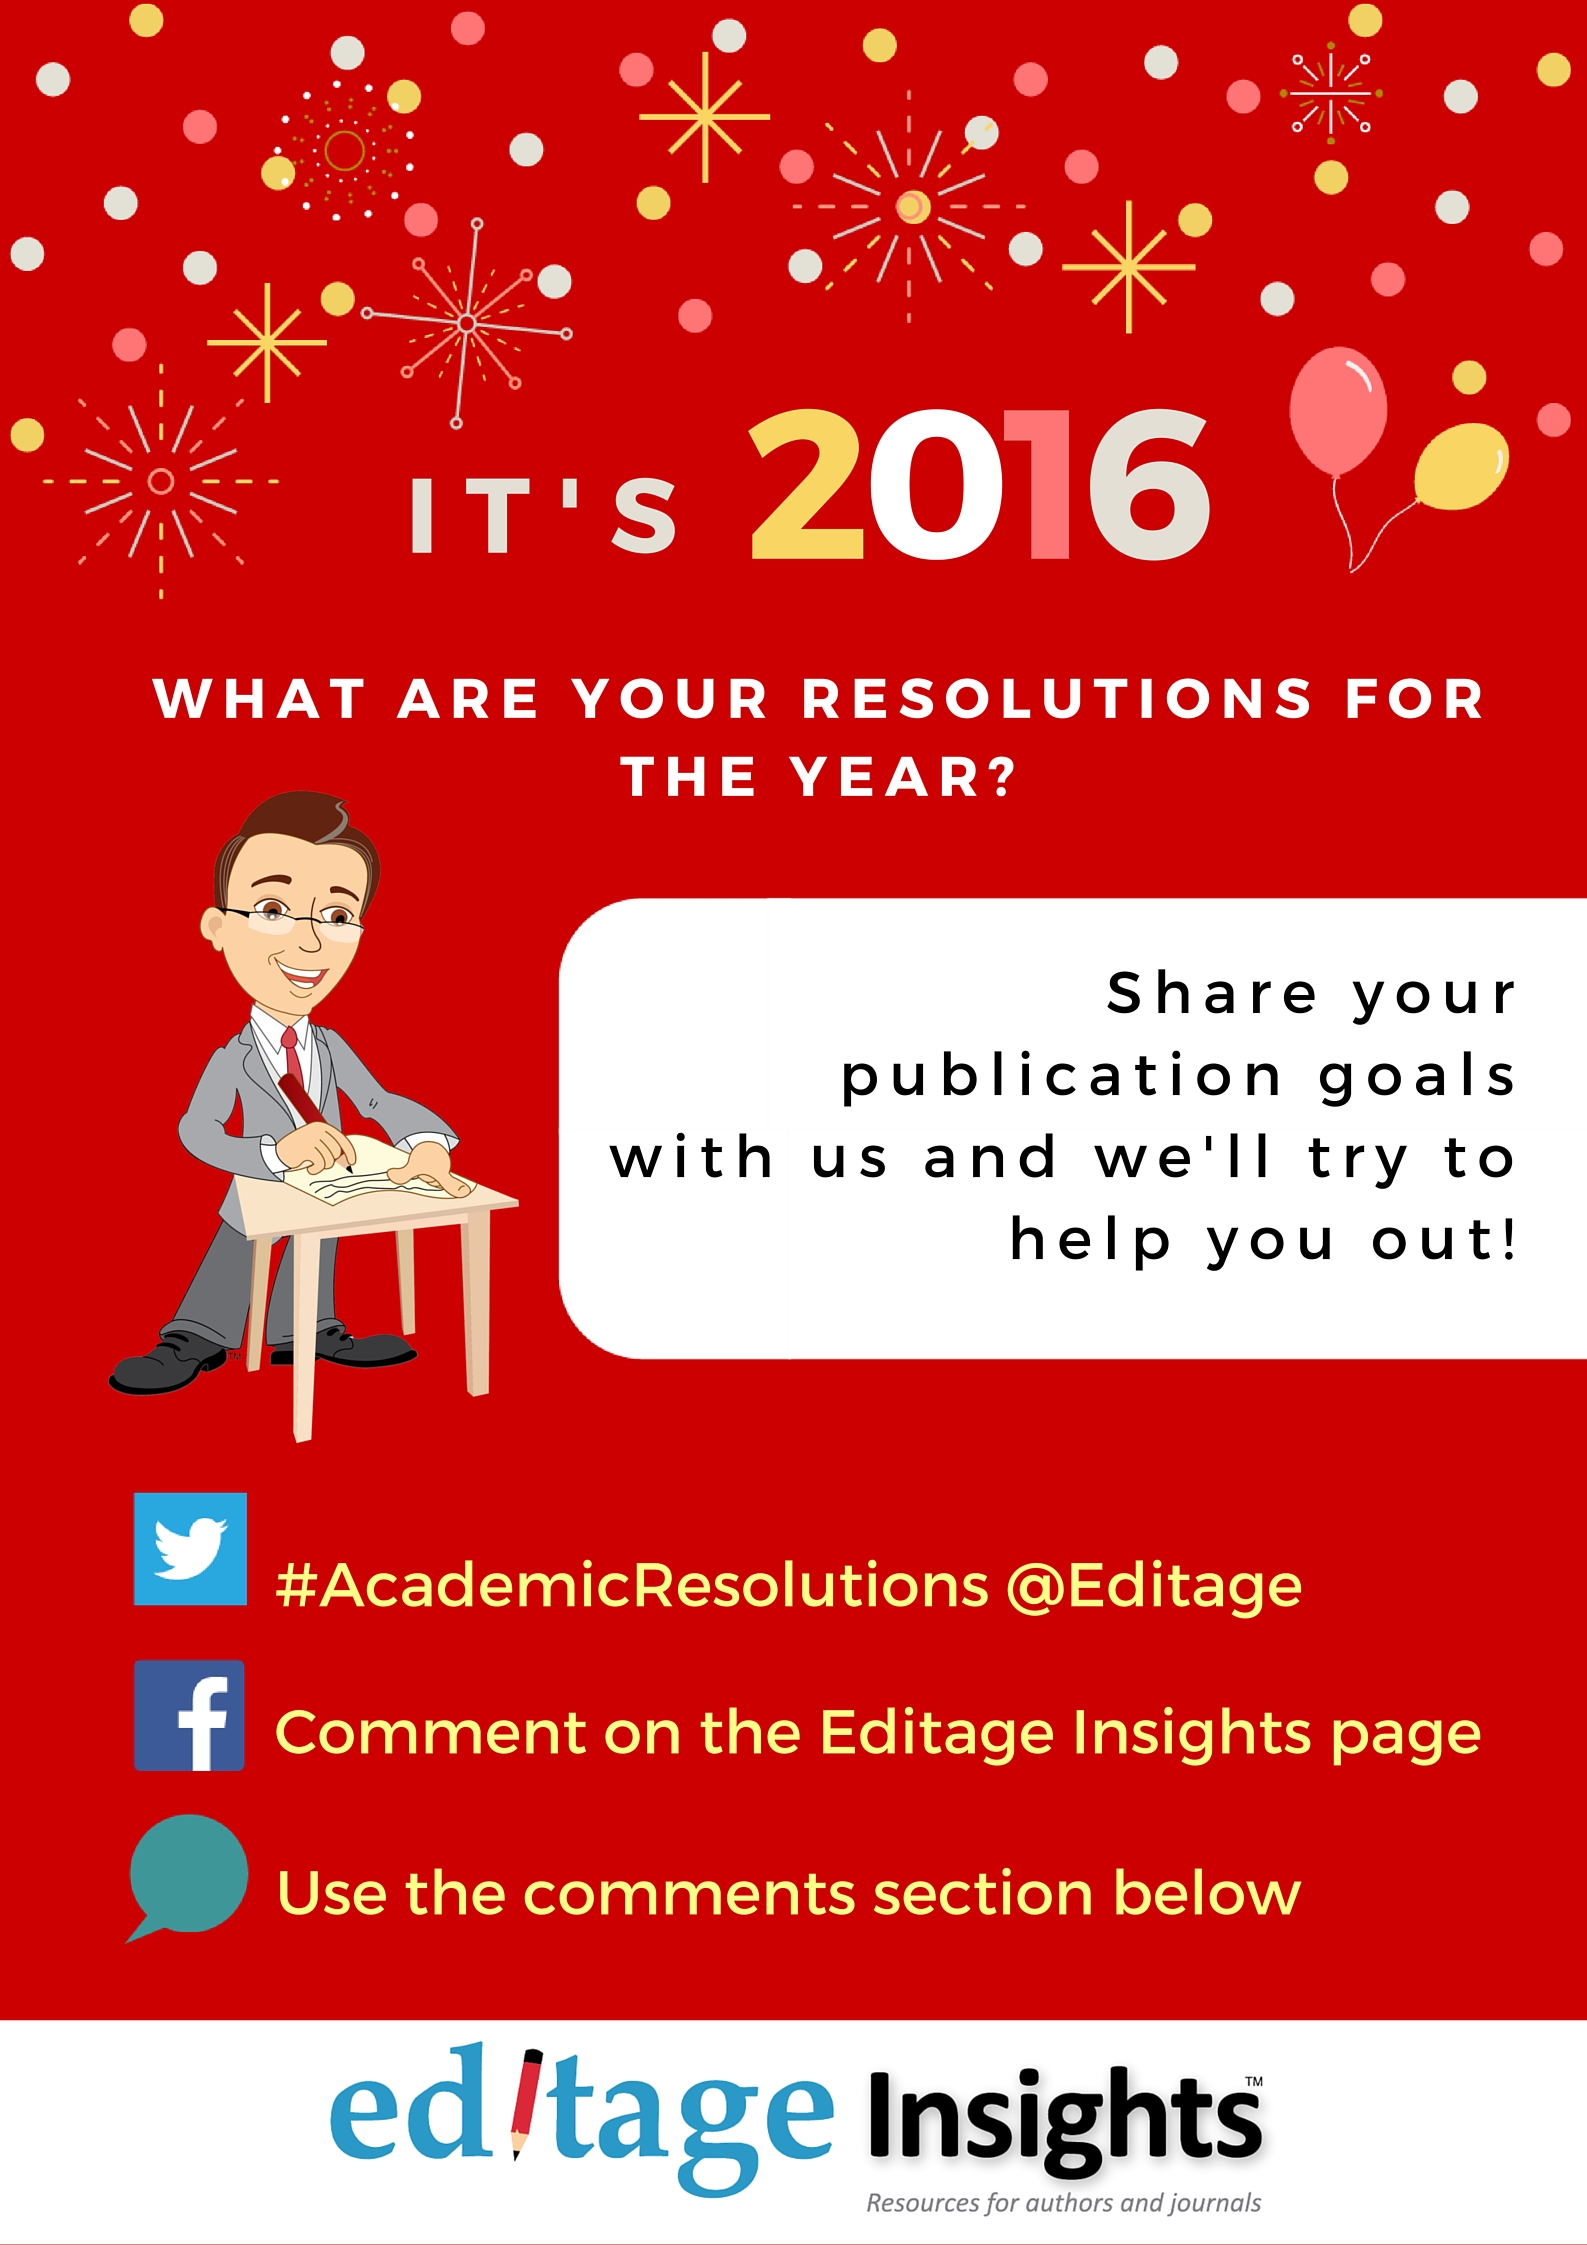 Academic resolutions for 2016